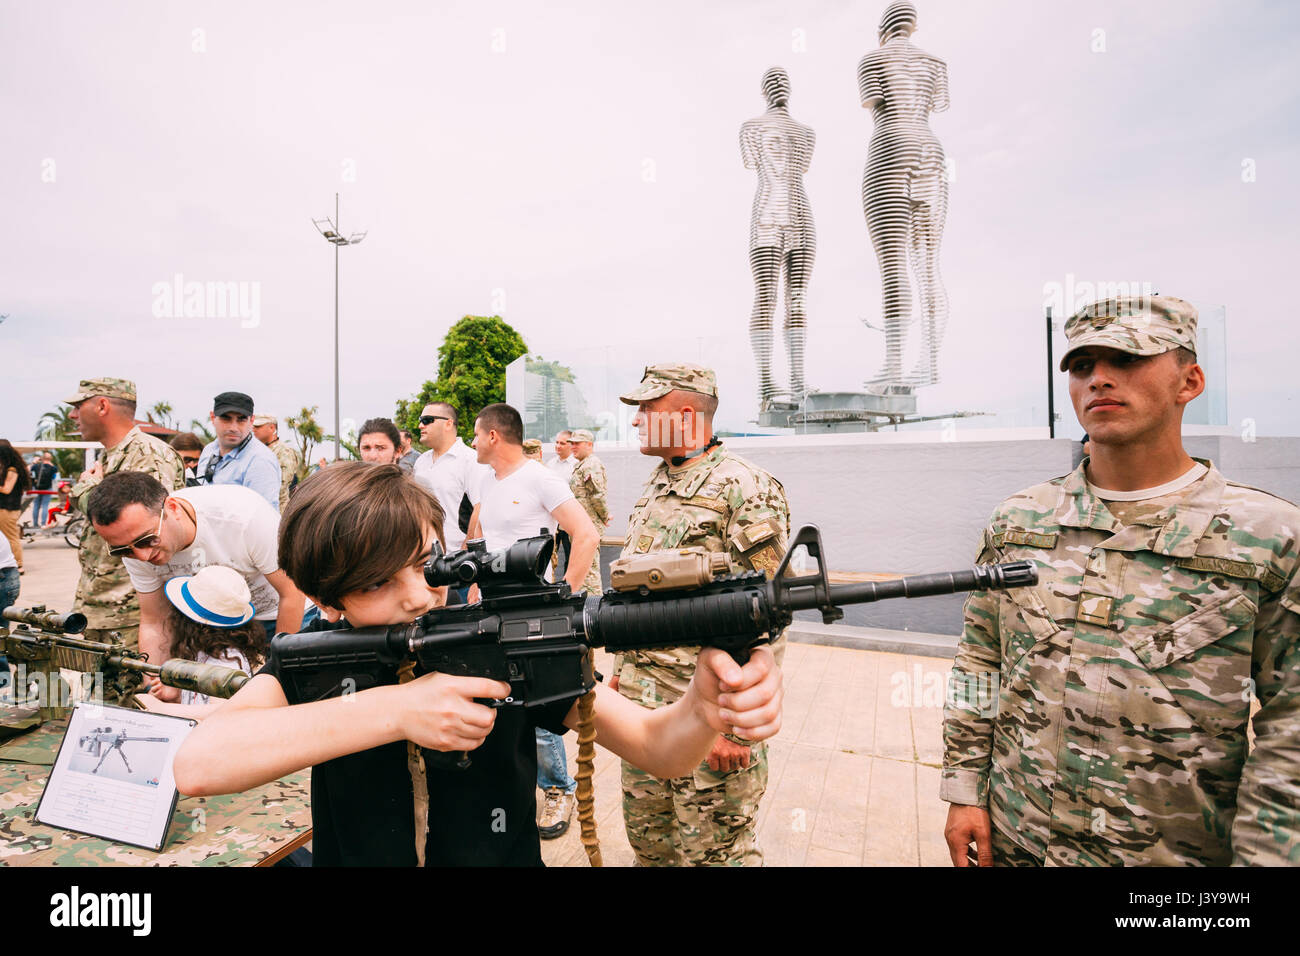 Batumi, Adjara, Georgia - May 26, 2016: Boy holding M4 assault rifle at an exhibition of weapons during celebration of the national holiday - the Inde Stock Photo